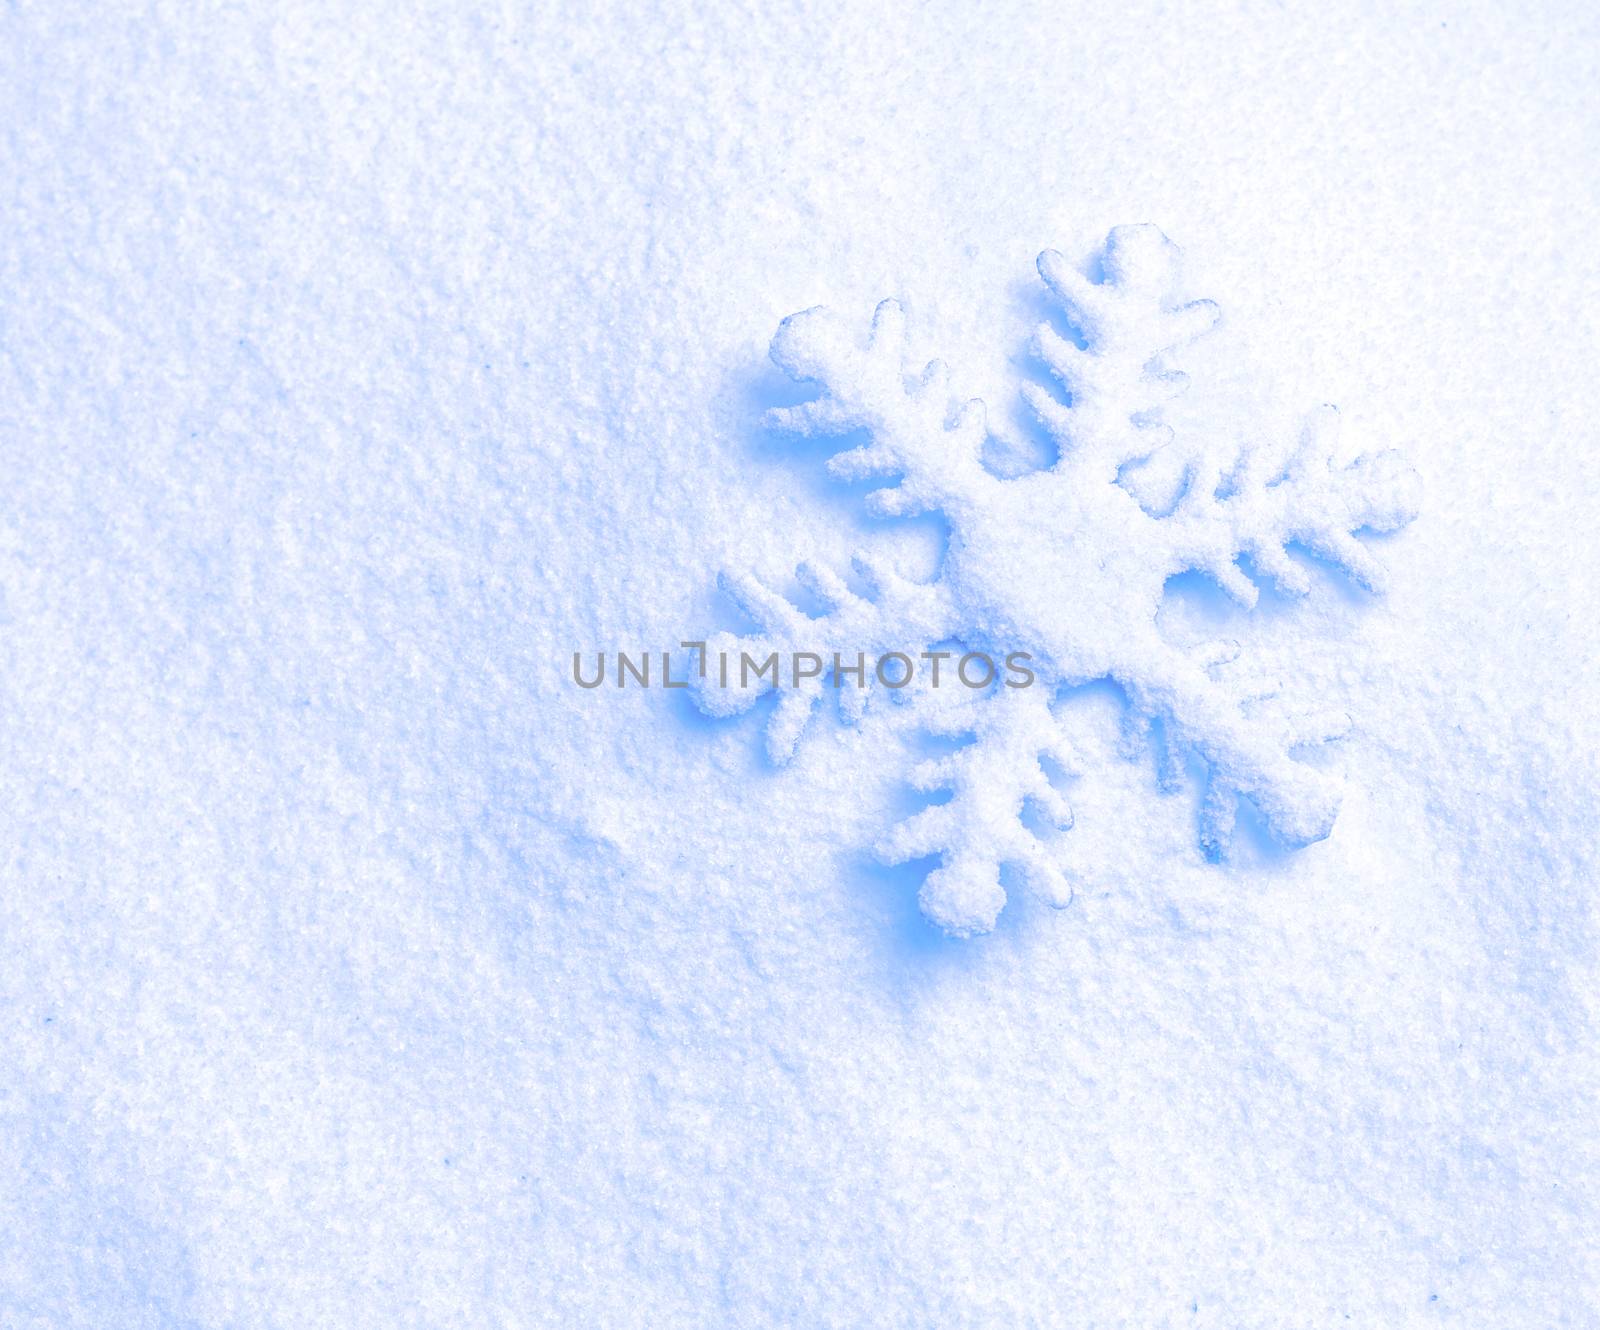 snowflake ornament against a background of snow